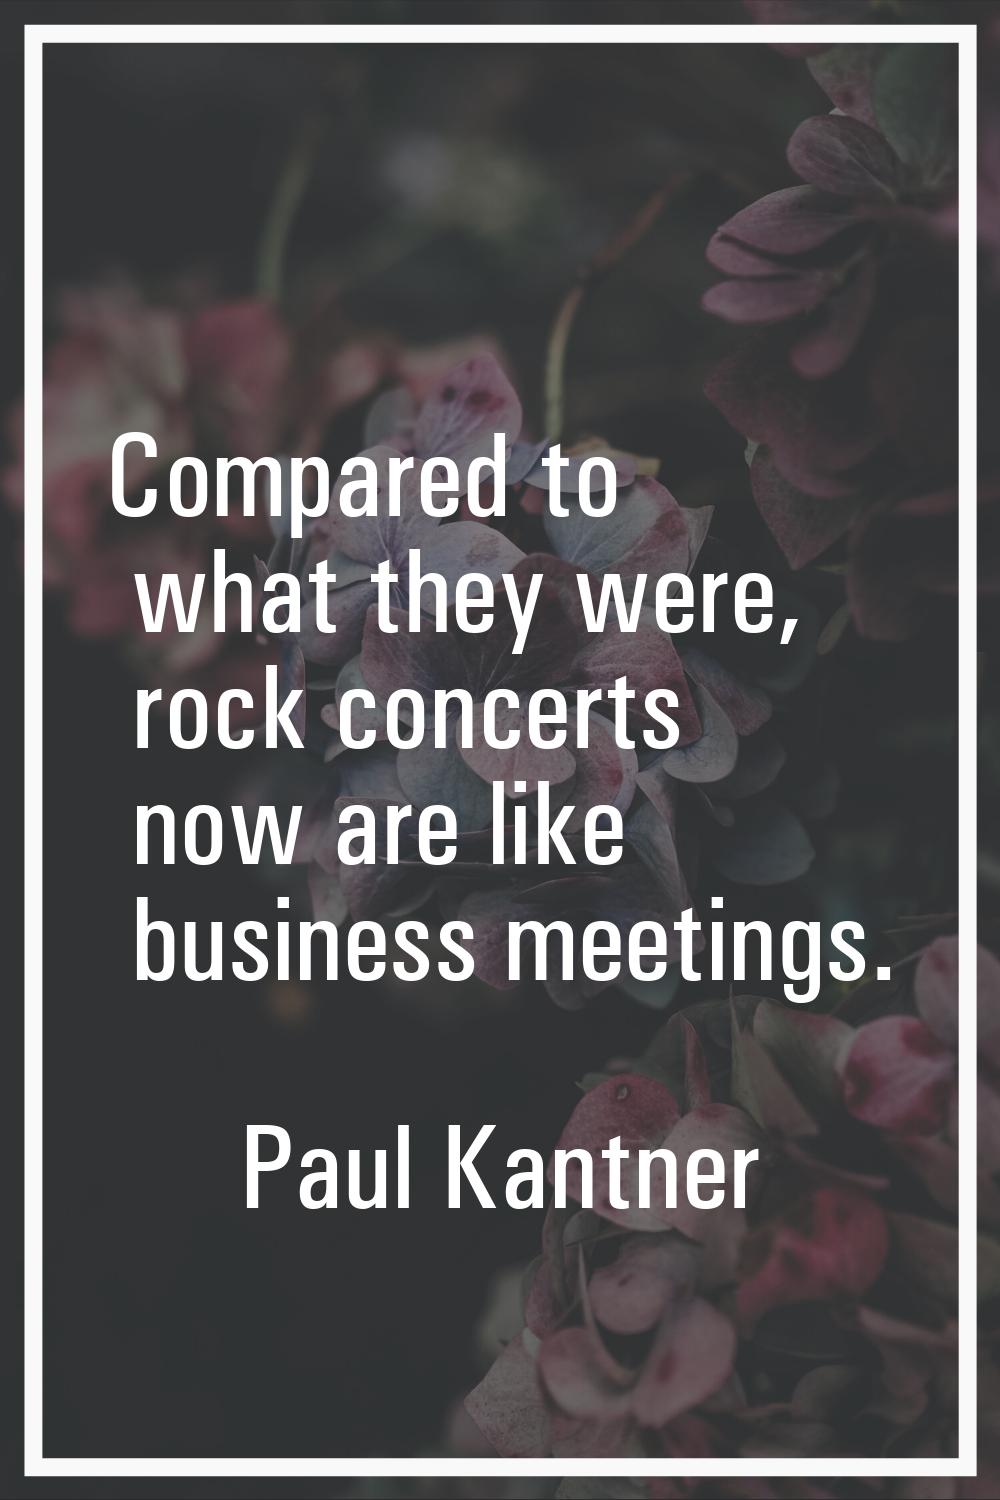 Compared to what they were, rock concerts now are like business meetings.